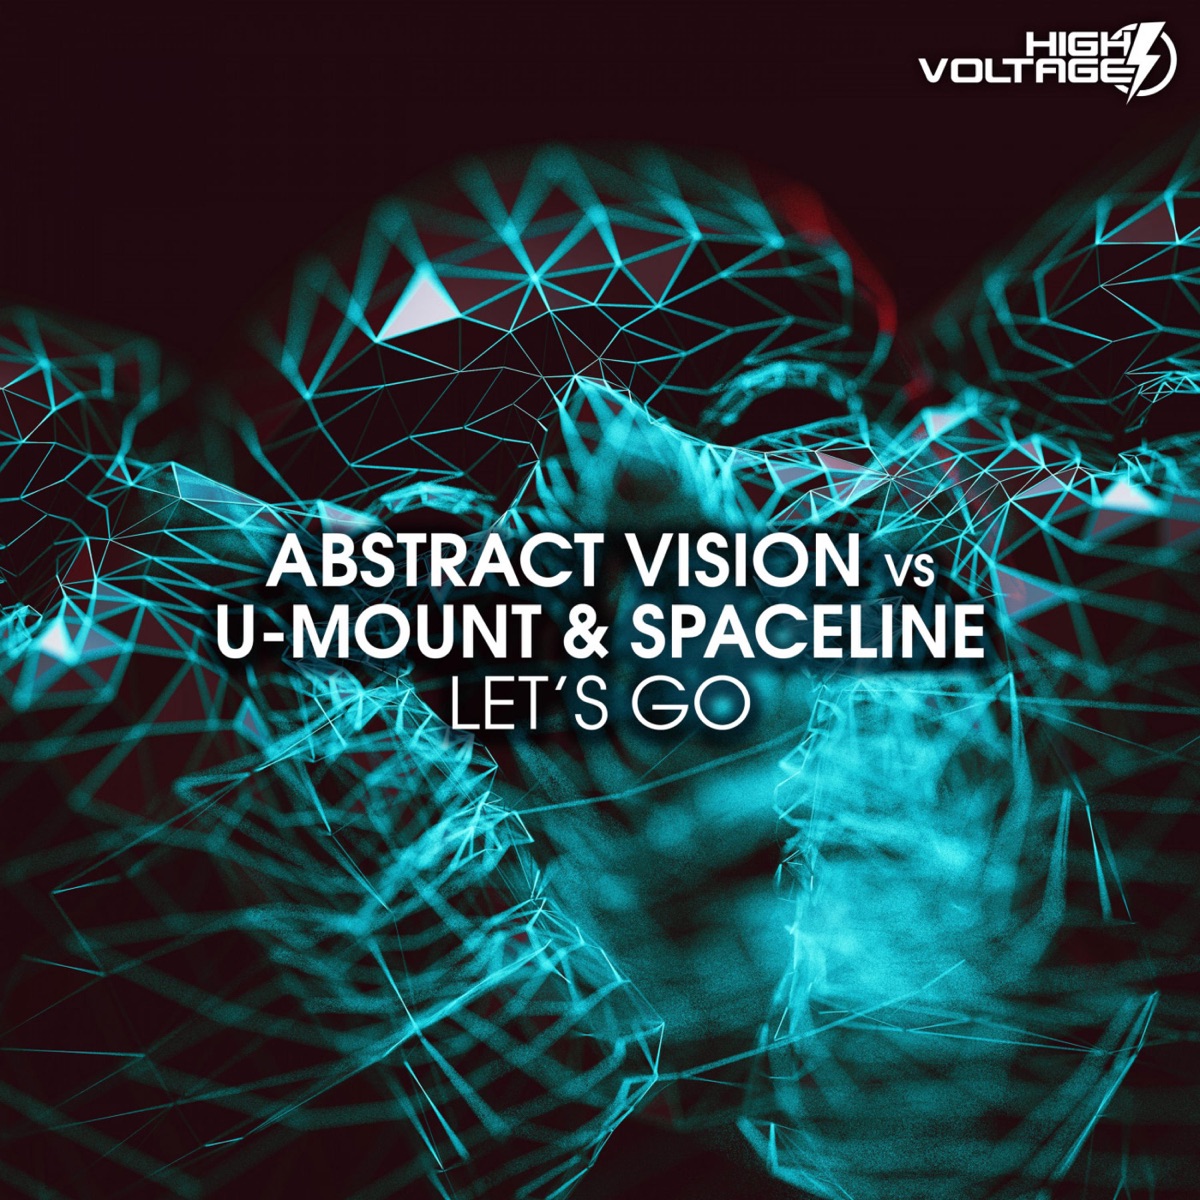 Abstract vision & elite electronic ft eva kade miracle